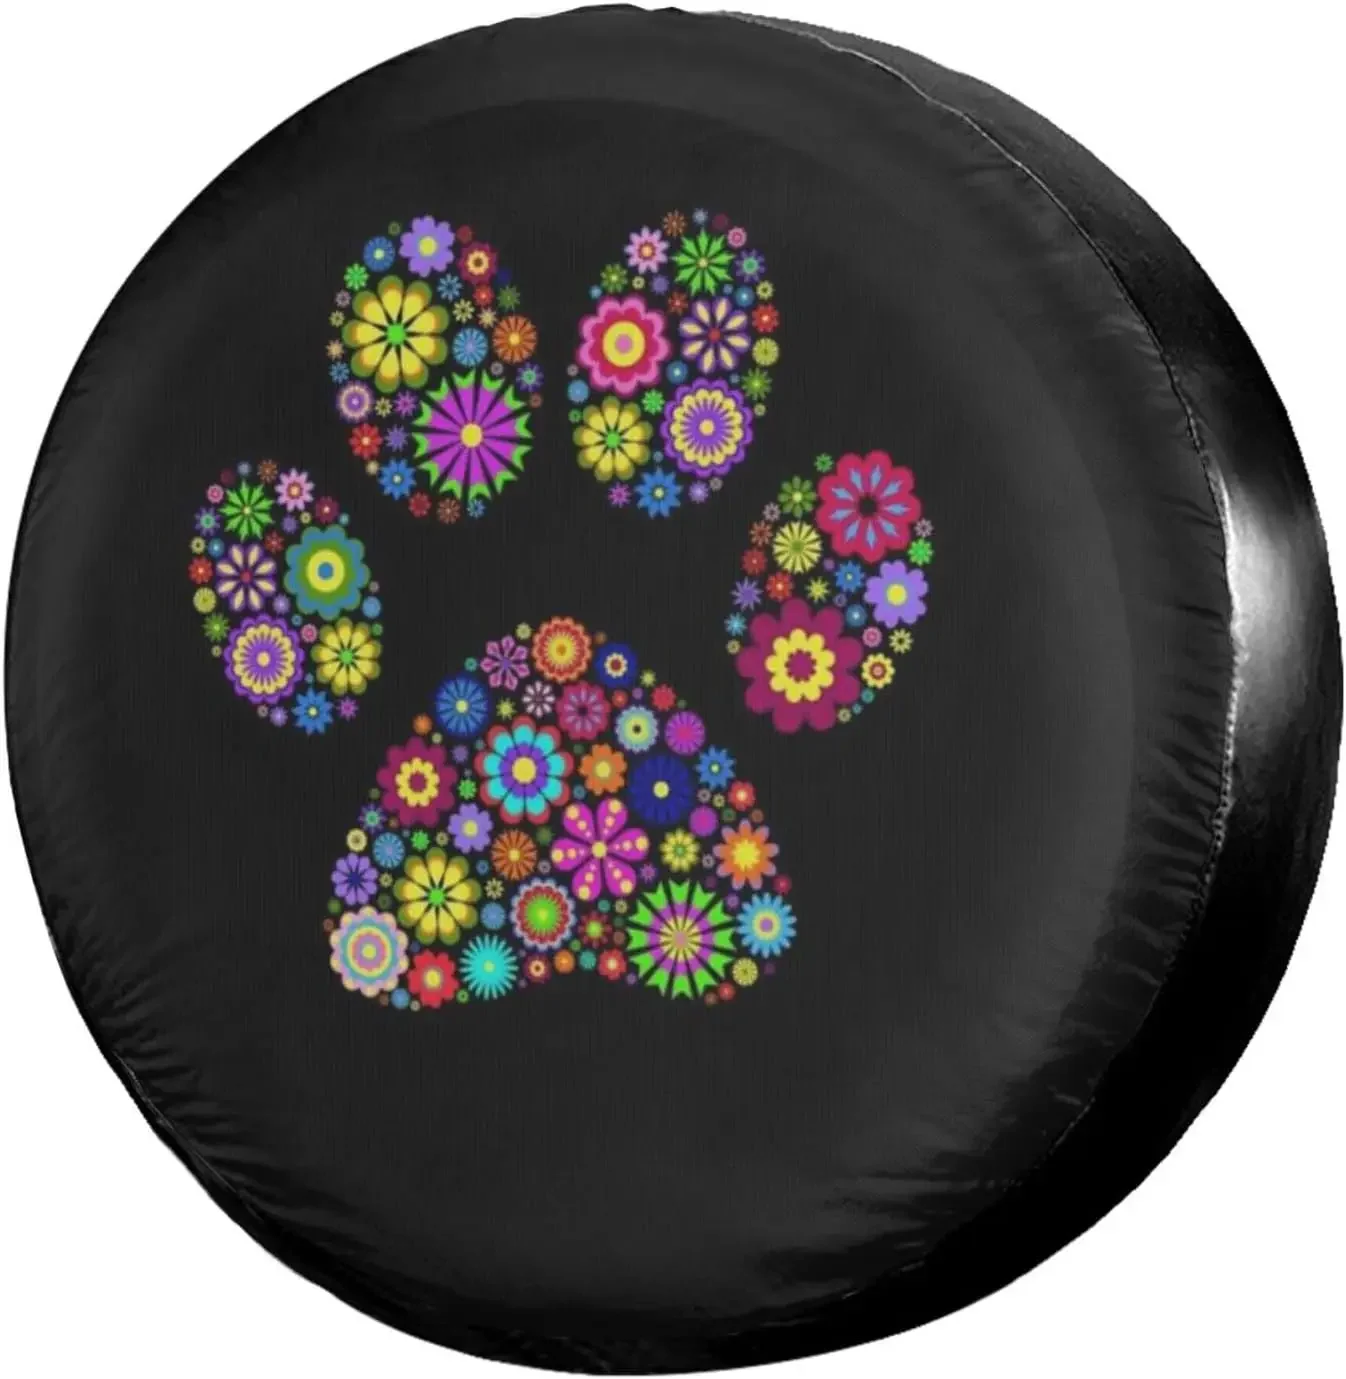 

Animal Paw Print Spare Tire Cover Dust-Proof Wheel Tire Cover Fit Trailer RV SUV and Many Vehicle Truck Camper Travel Trailer